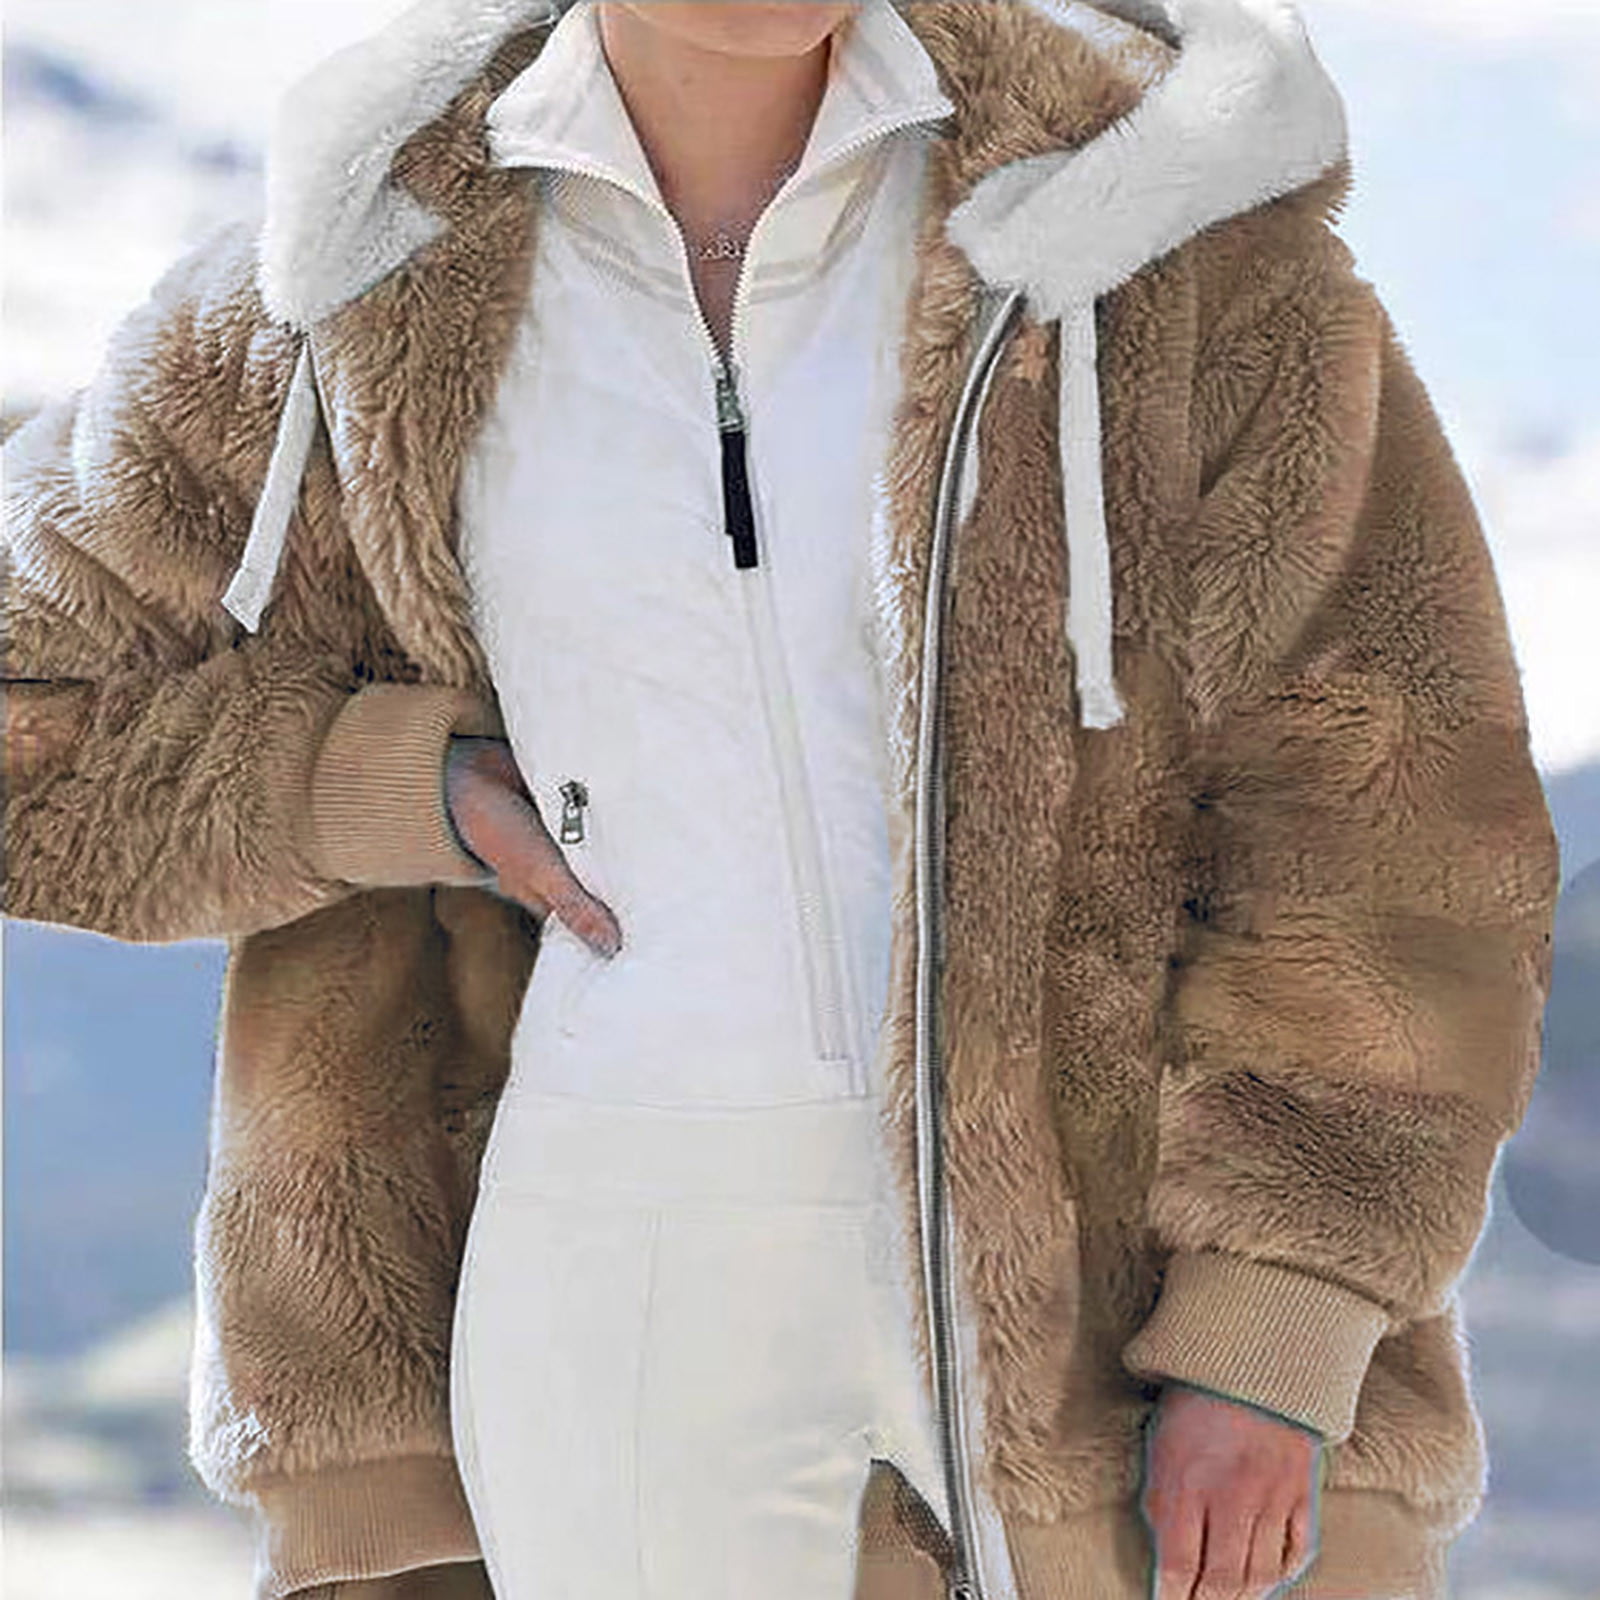 spring jackets for women on clearance,women plus size winter warm loose plush zip hooded jacket coat,casual spring fall jacket - Walmart.com